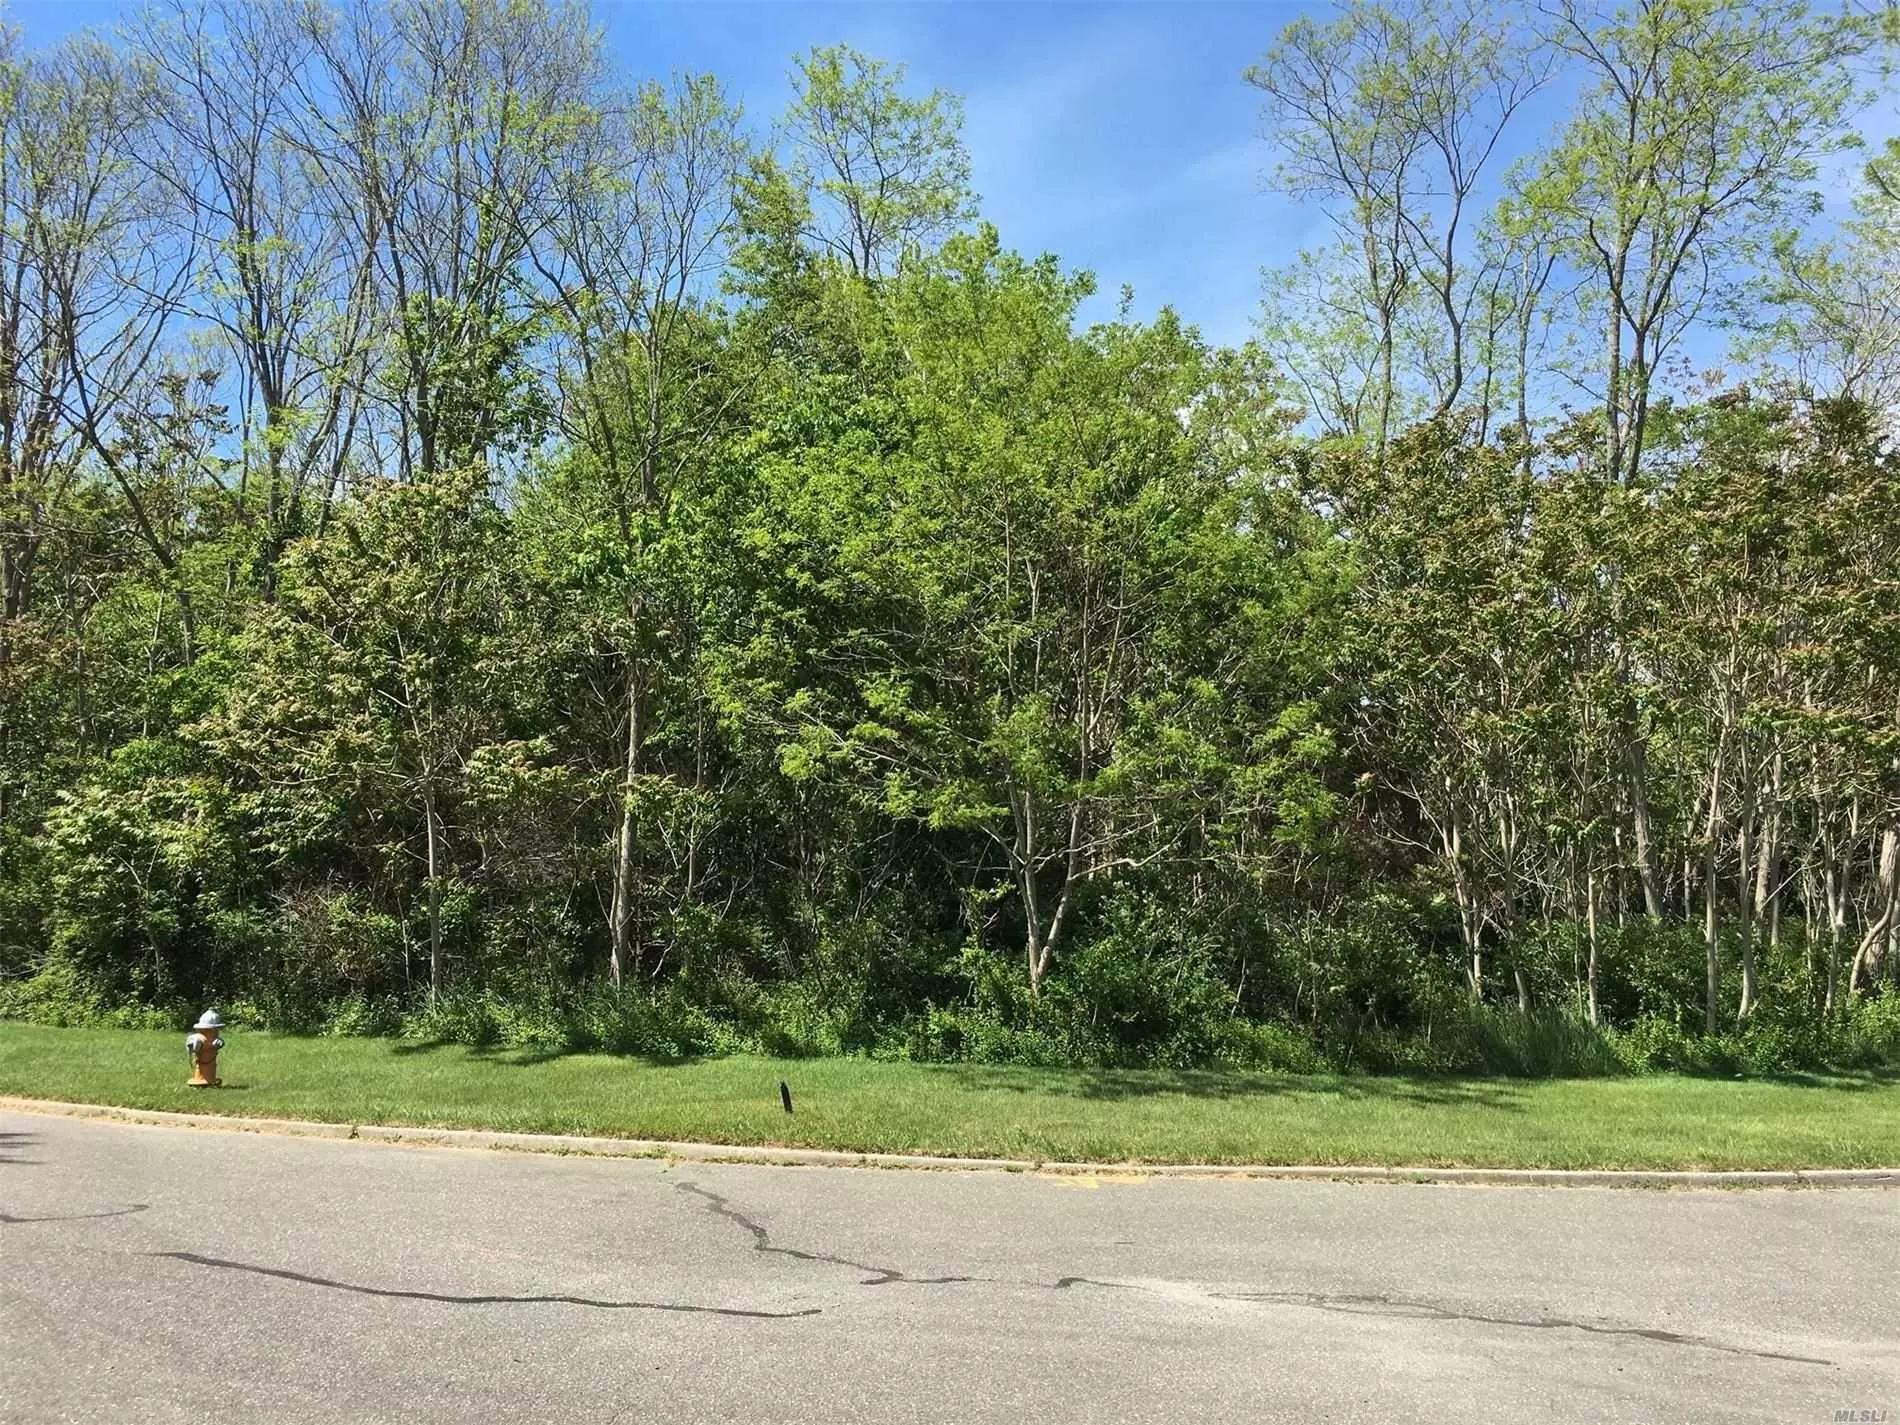 Shy Acre Building Lot In Peaceful, Upscale Cul-De-Sac Neighborhood Off Peconic Bay Boulevard. Comes With 2 Deepwater Boat Slips And Direct Bay Access.